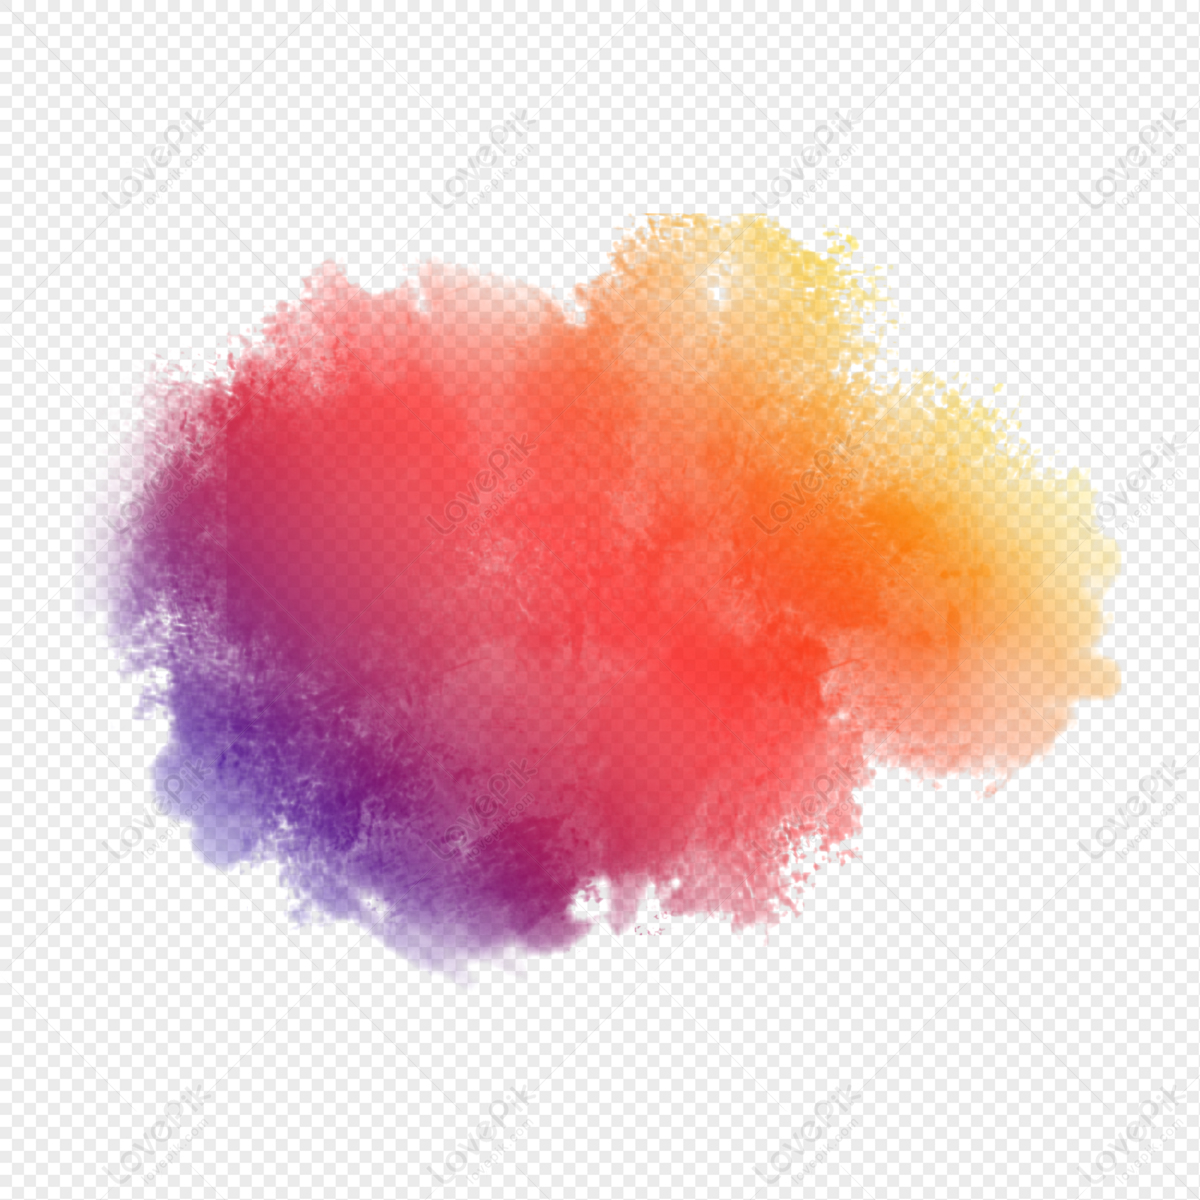 Watercolor Splash Images, HD Pictures For Free Vectors & PSD Download -  